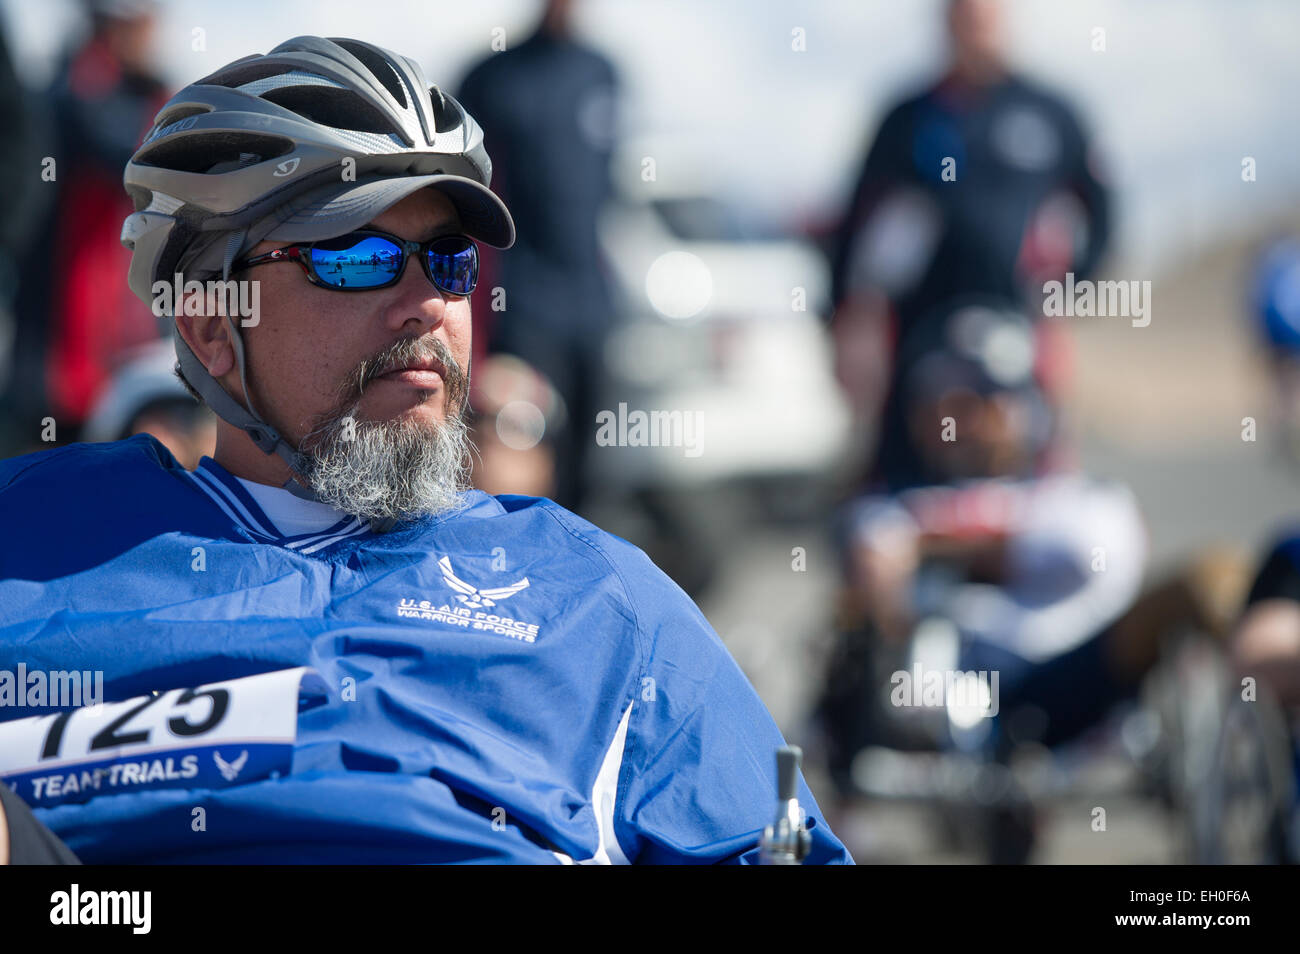 Mark Devisfruto, a 2015 Air Force Wounded Warrior cycling competitor, waits to start the mens recumbent cycling race at Nellis Air Force Base, Nev. Feb. 28, 2015.  The recumbent race is one of the three cycling events the warrior athletes competed in. The Air Force Trials are an adaptive sports event designed to promote the mental and physical well-being of seriously ill and injured military members and veterans. More than 105 wounded, ill or injured service men and women from around the country will compete for a spot on the 2015 U.S. Air Force Wounded Warrior Team which will represent the Ai Stock Photo